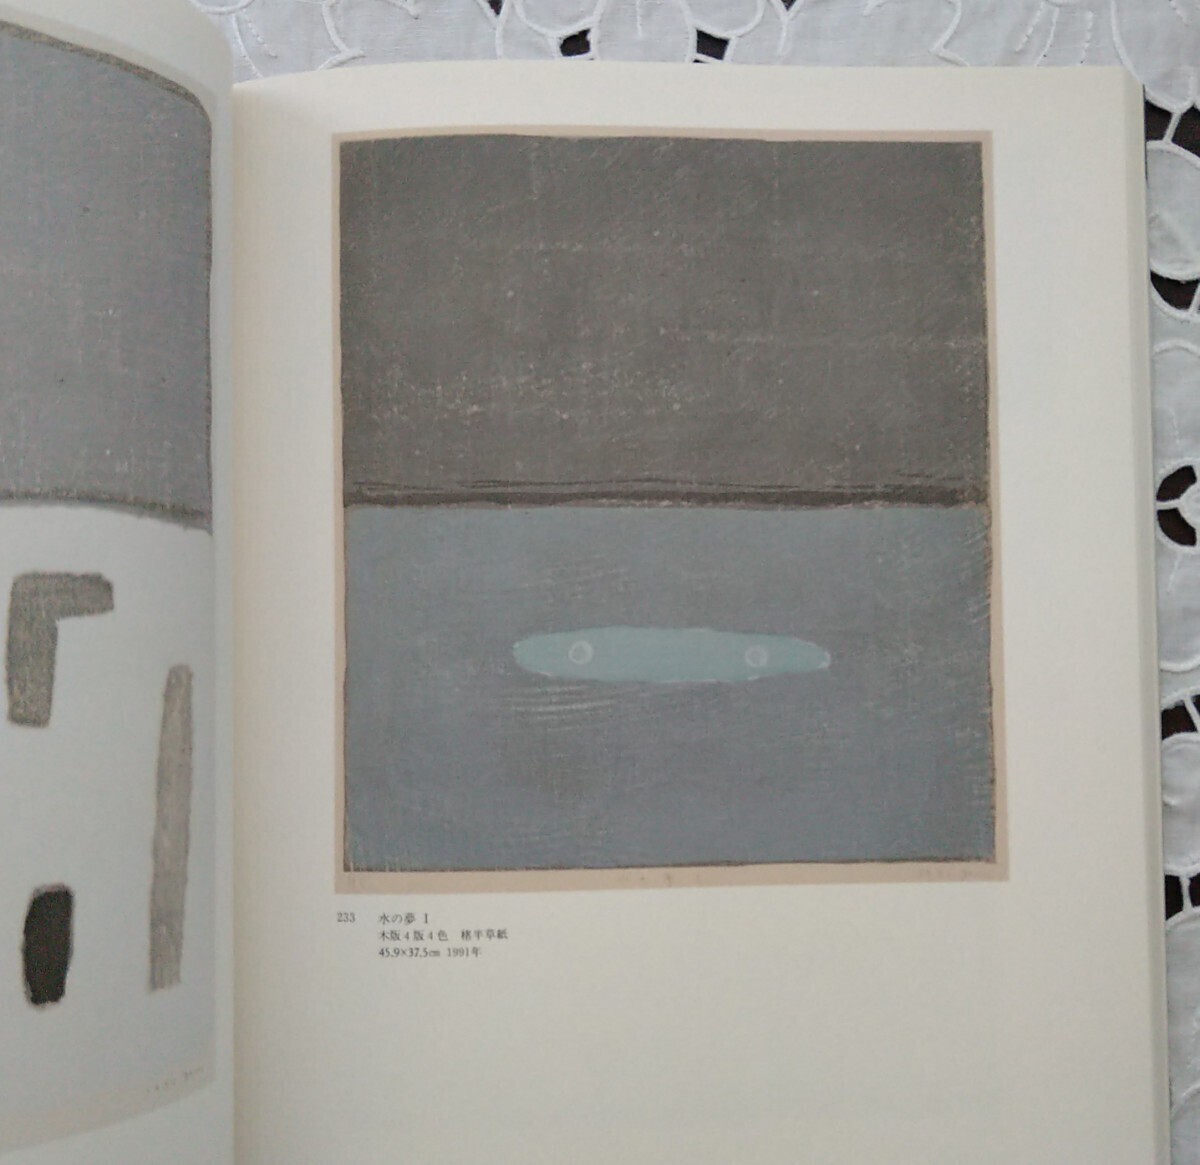  mountain middle reality all woodcut compilation 1976-1993 limitation 1,500 part ART GALLERY TAPIES 1994 year issue 